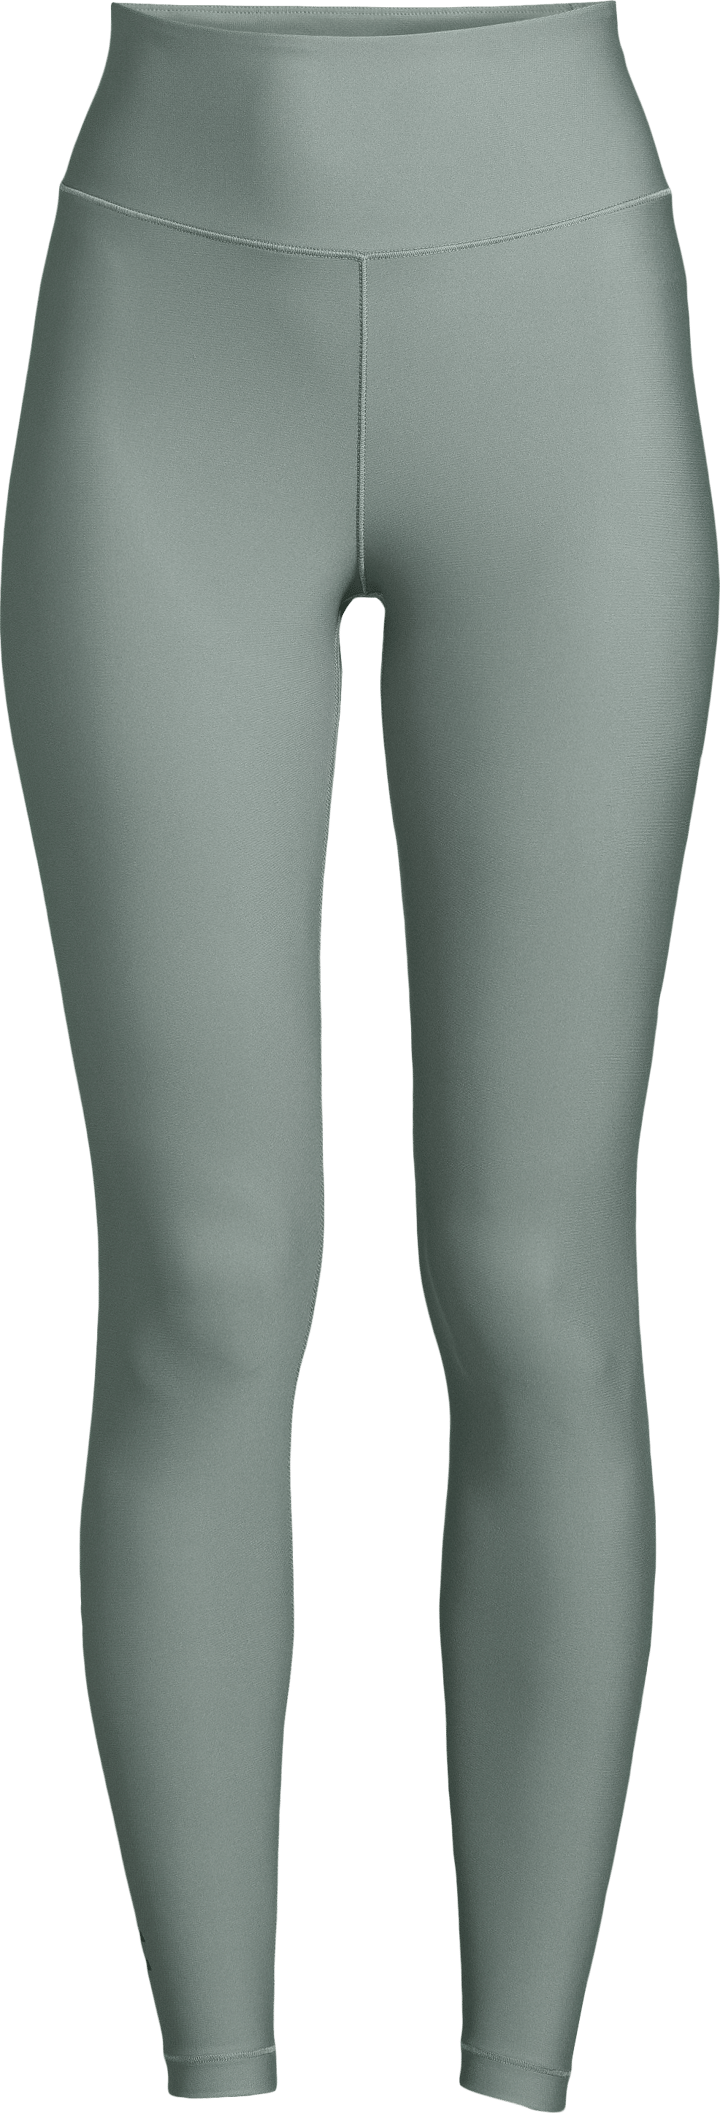 Women's Graphic Sport Tights Dusty Green Casall